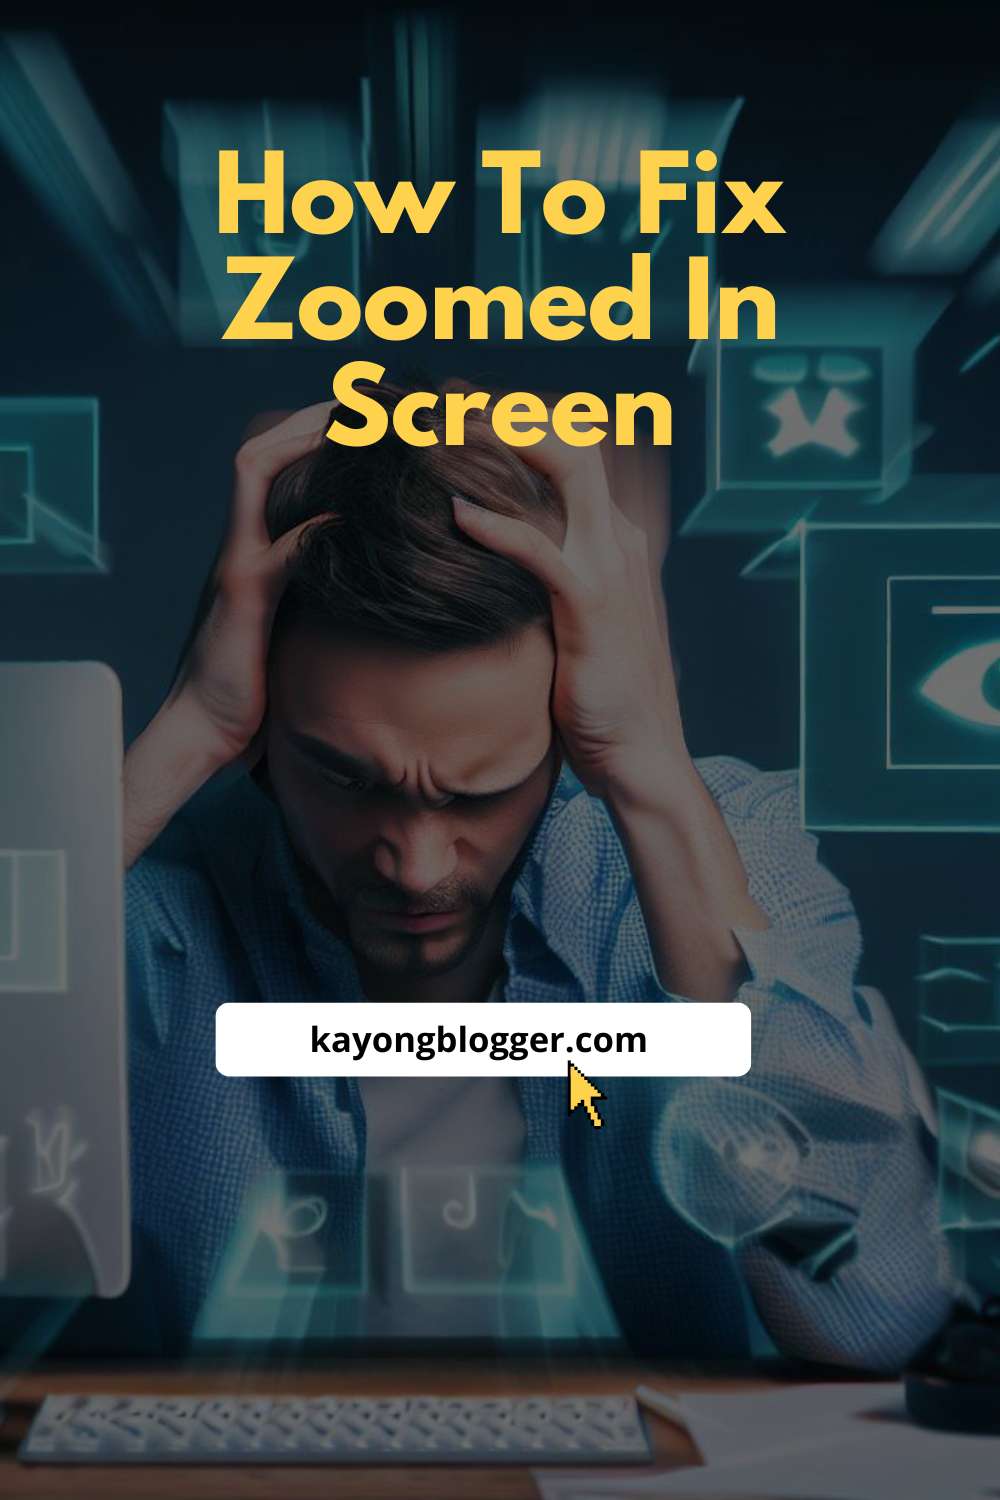 How To Fix Zoomed In Screen